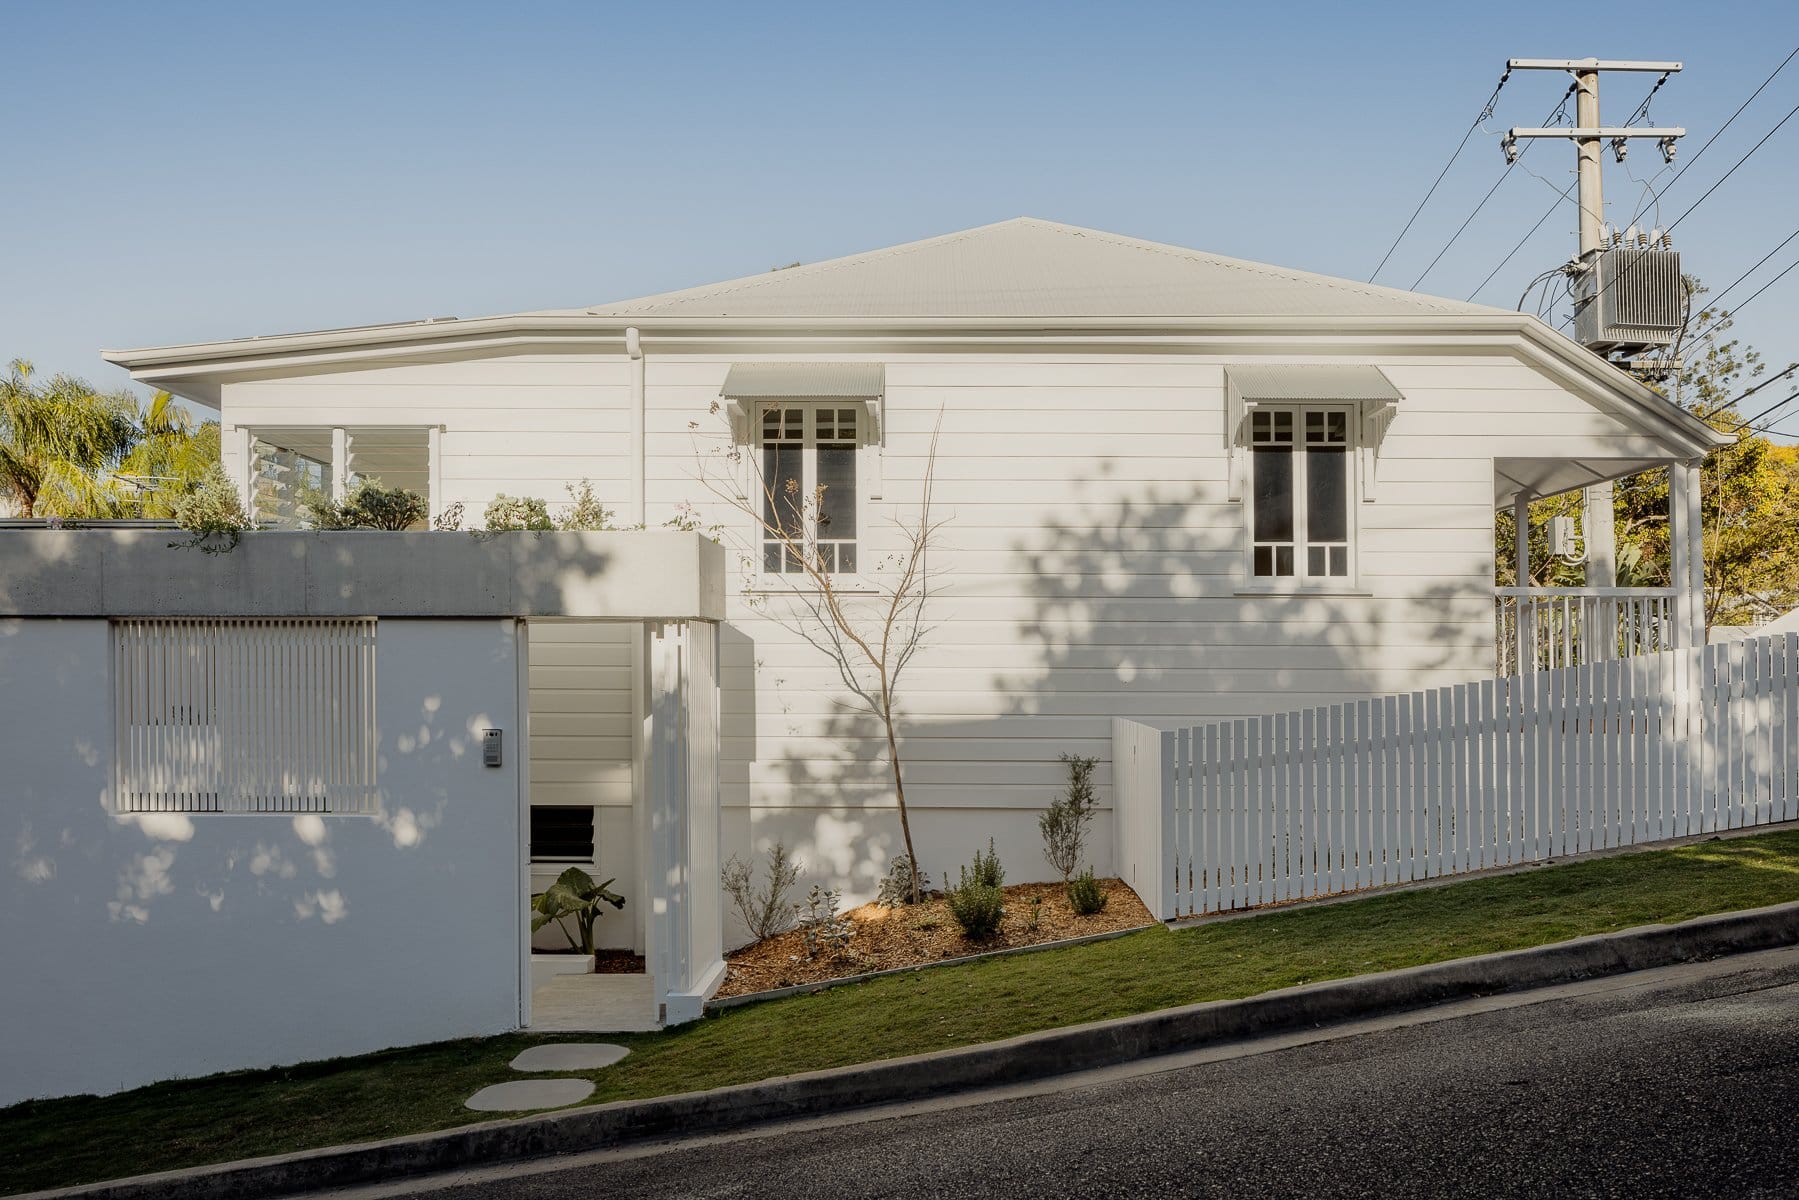 Hazlewood House by Favell Architects. Photography by Andy Macpherson. Side street facade of white clad cottage. Steep hill street access. White picket fence. 